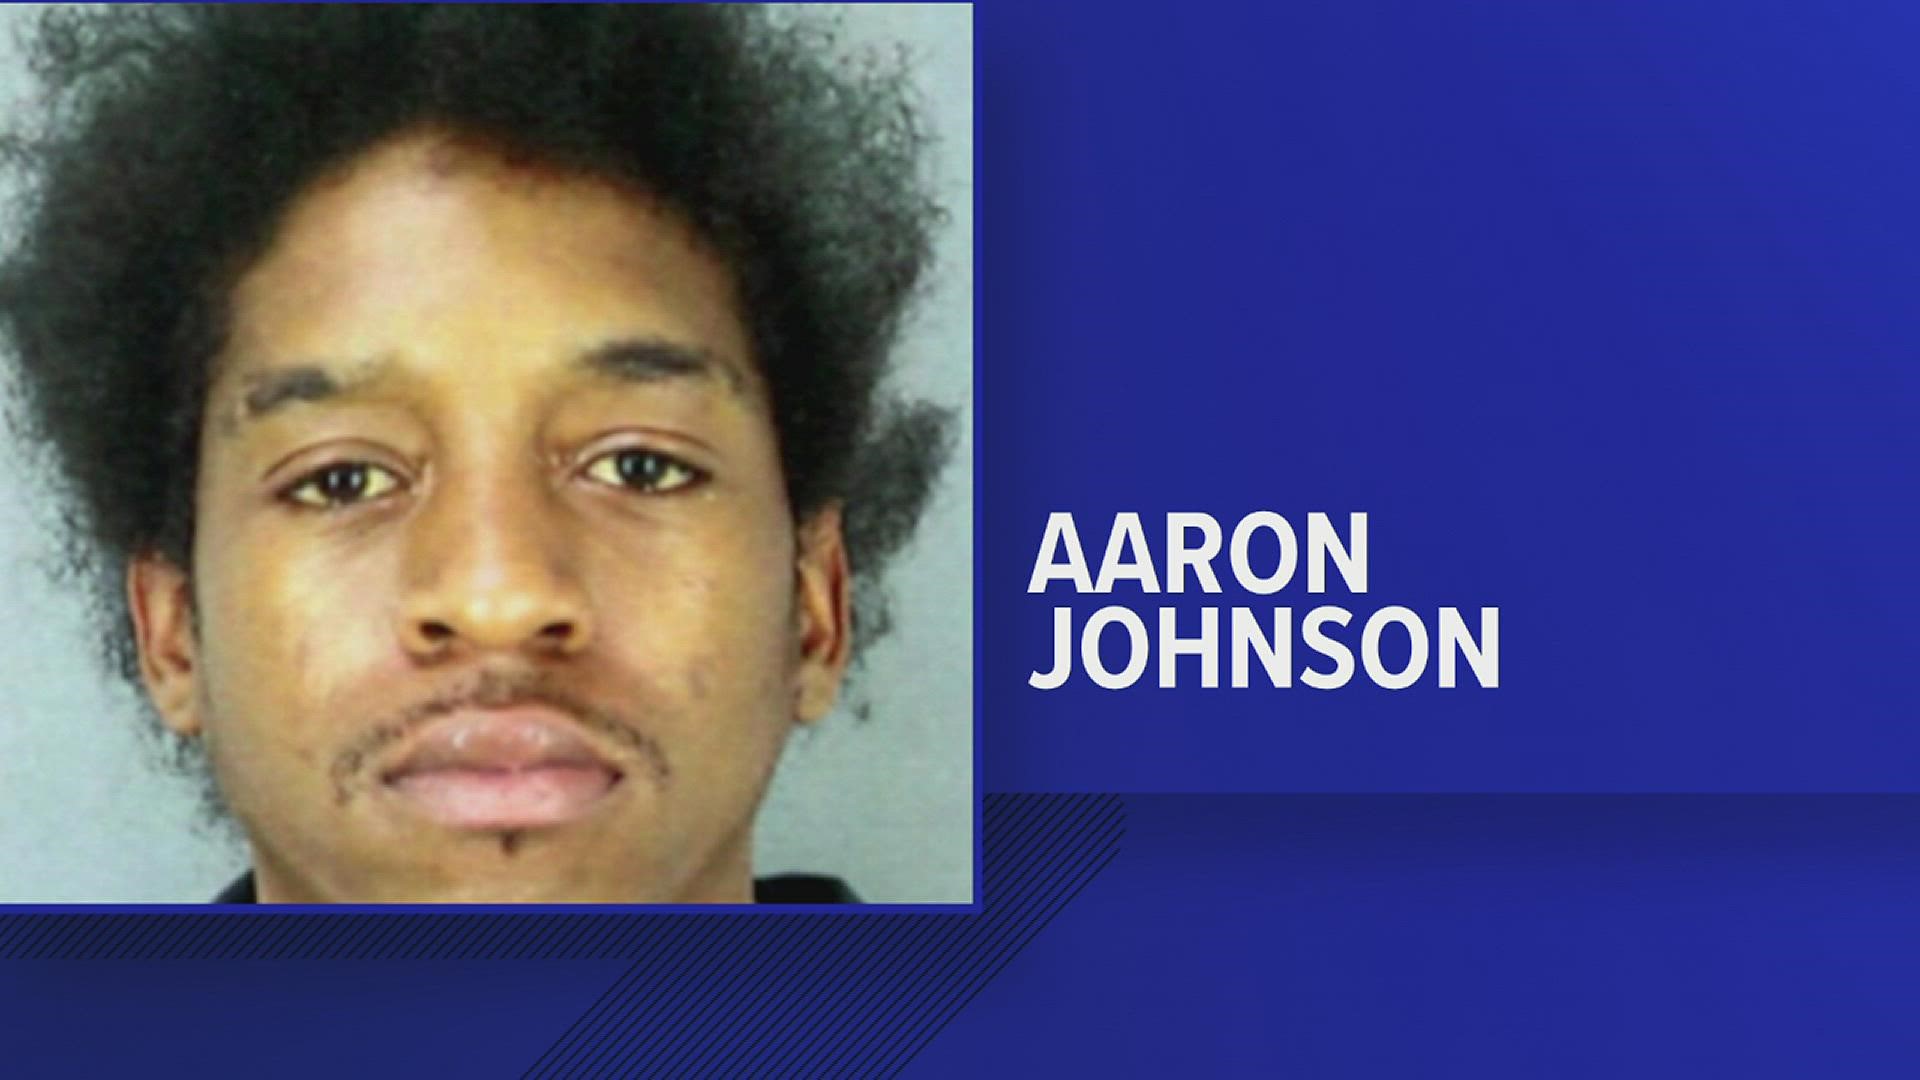 Aaron Johnson, 24, also had two warrants for aggravated kidnapping and aggravated assault, family violence. Plus, one for violating probation on a drug warrant.